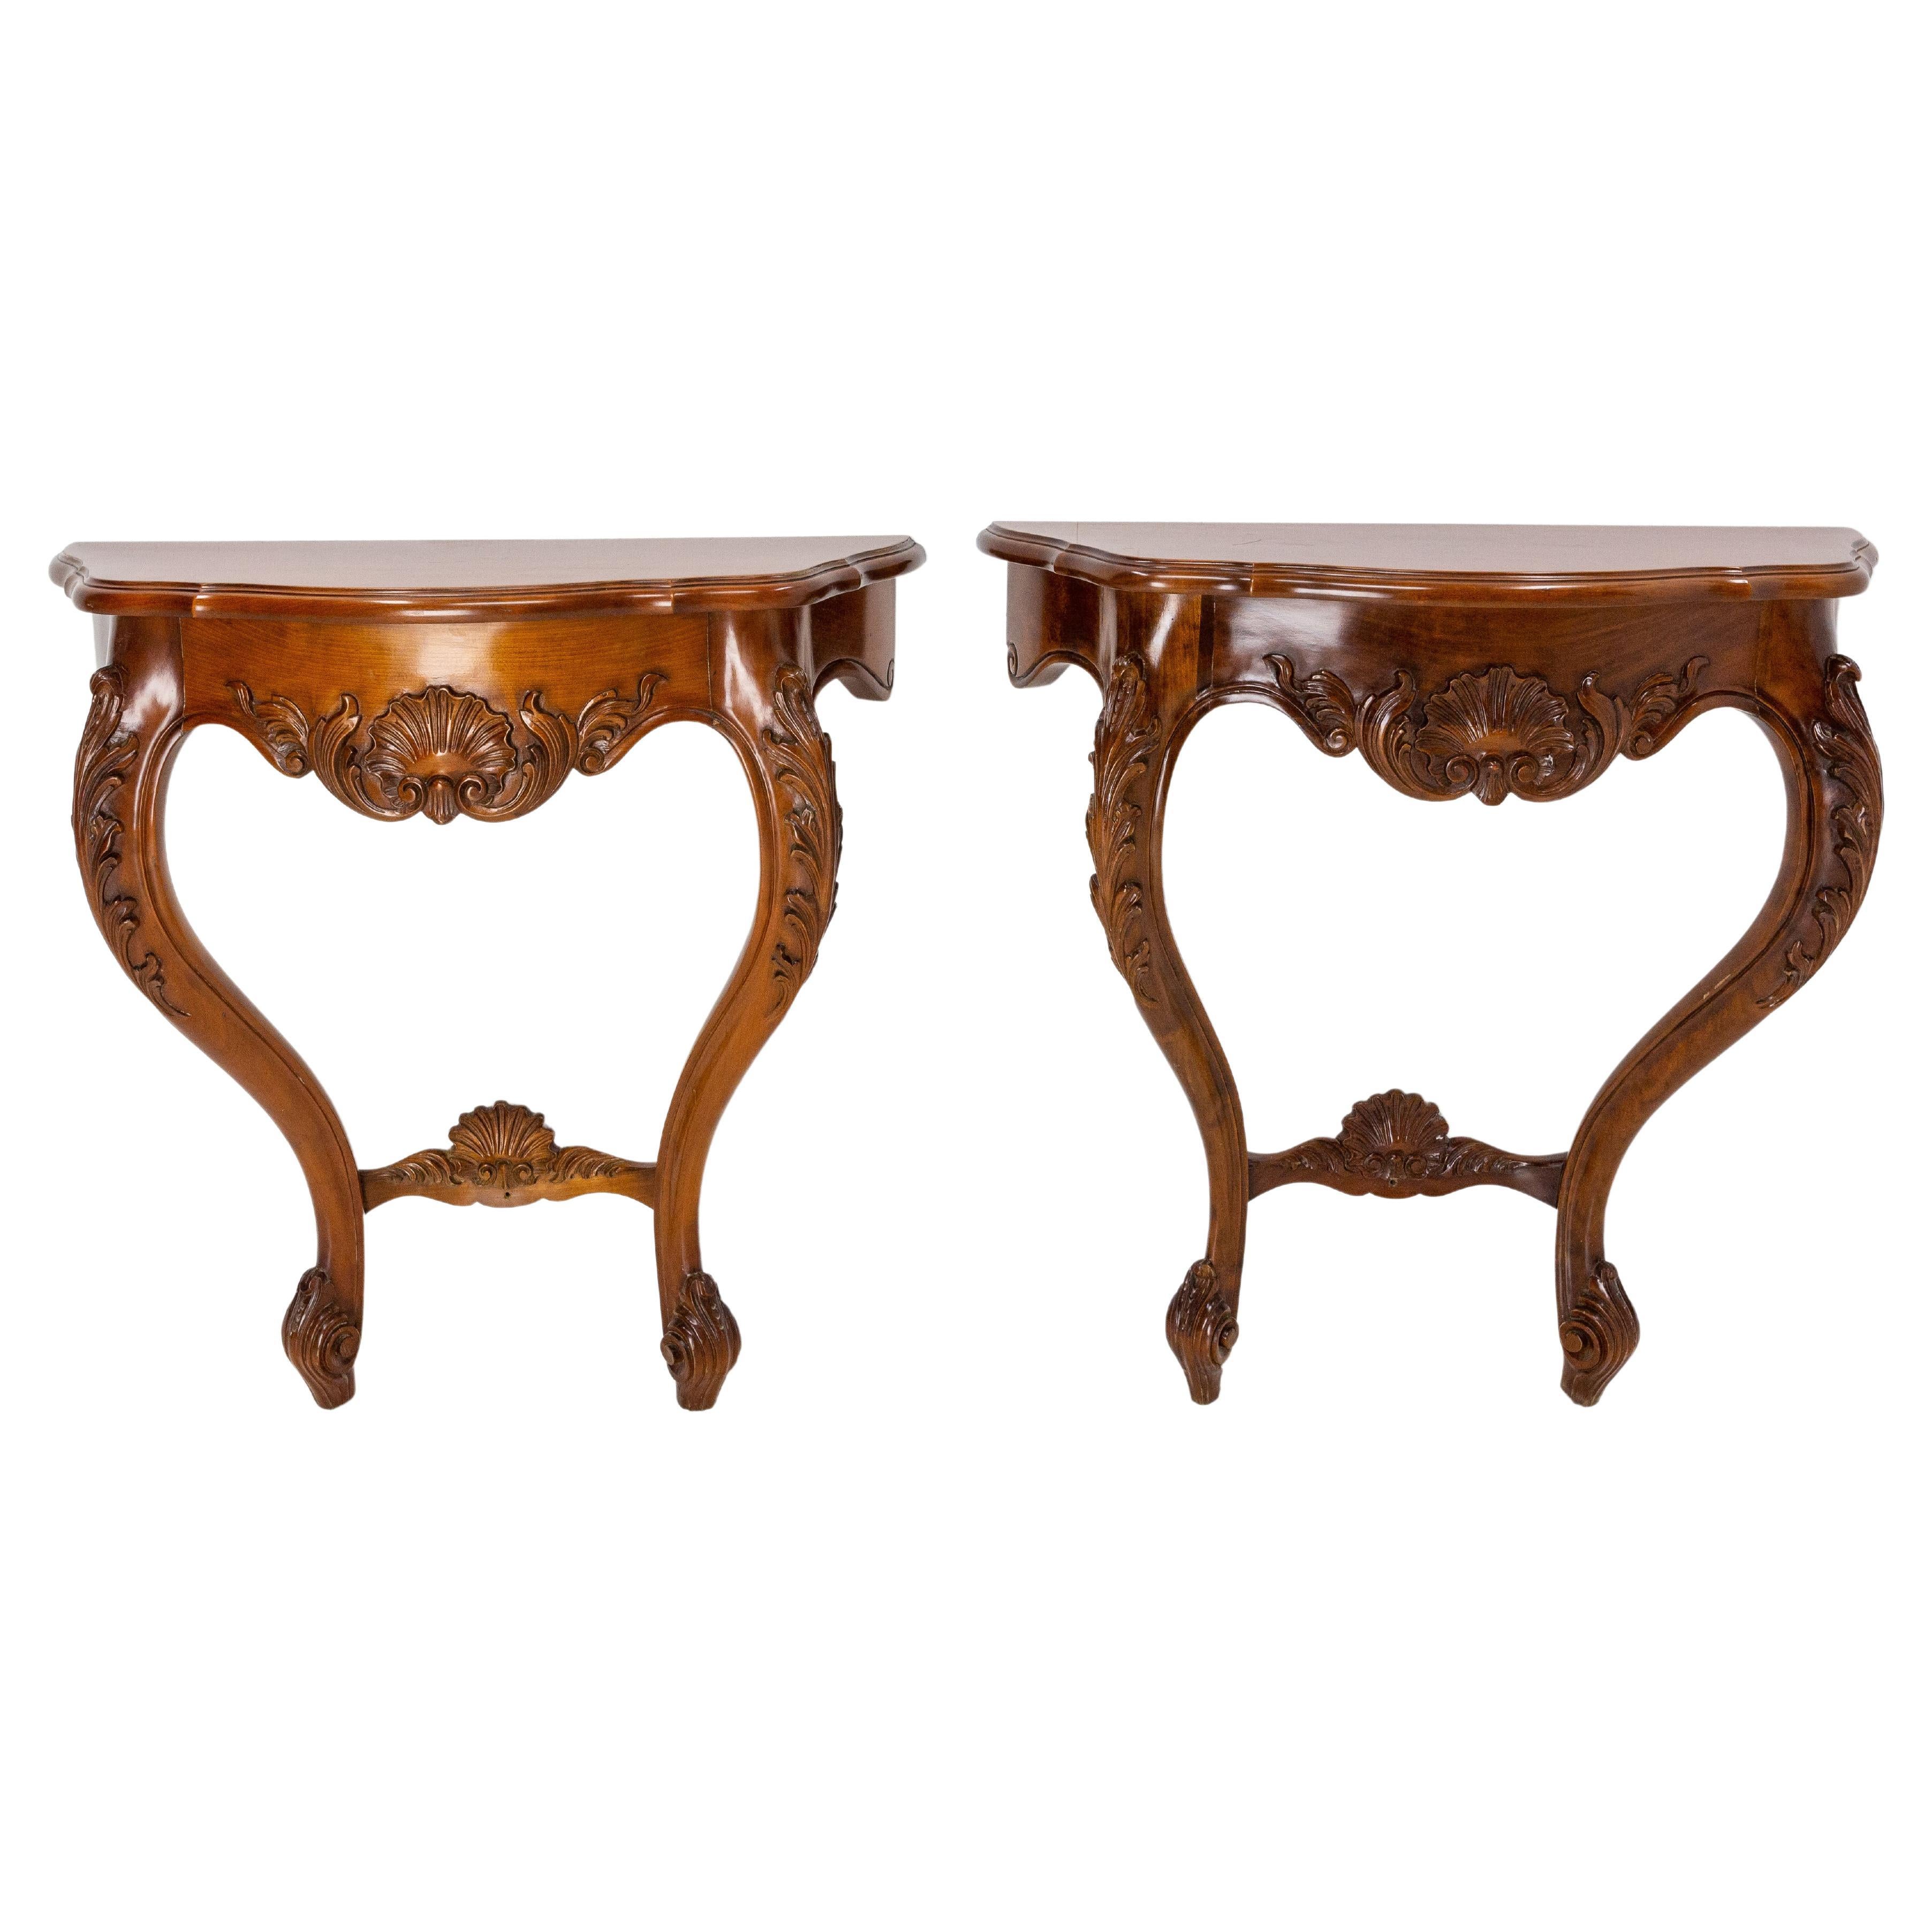 Pair of Small Console Tables French Brackets Wall Mounted Shelves Louis XV Style